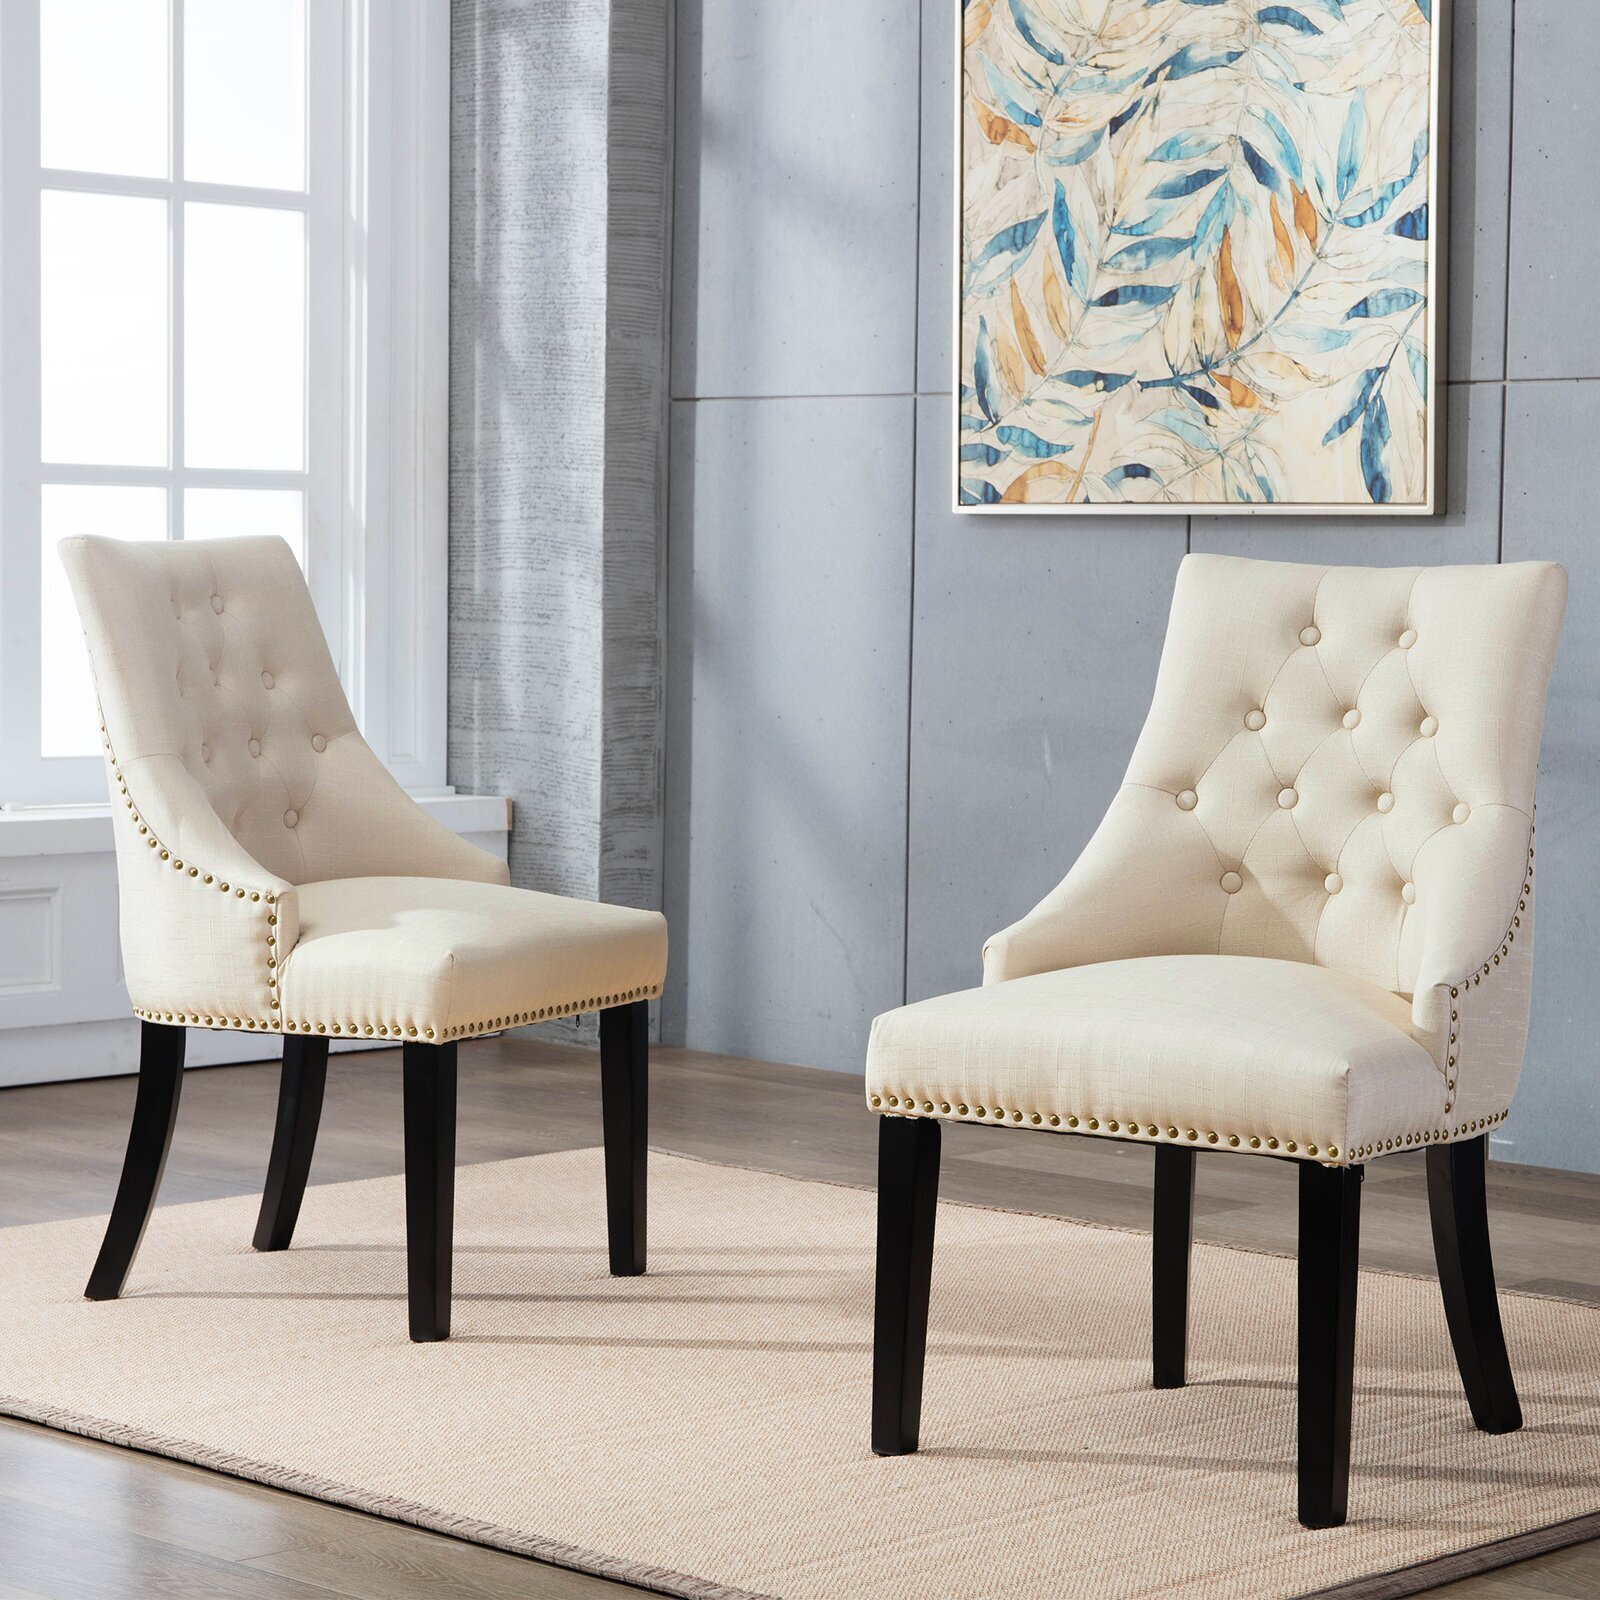 Tufted back dining captains chairs